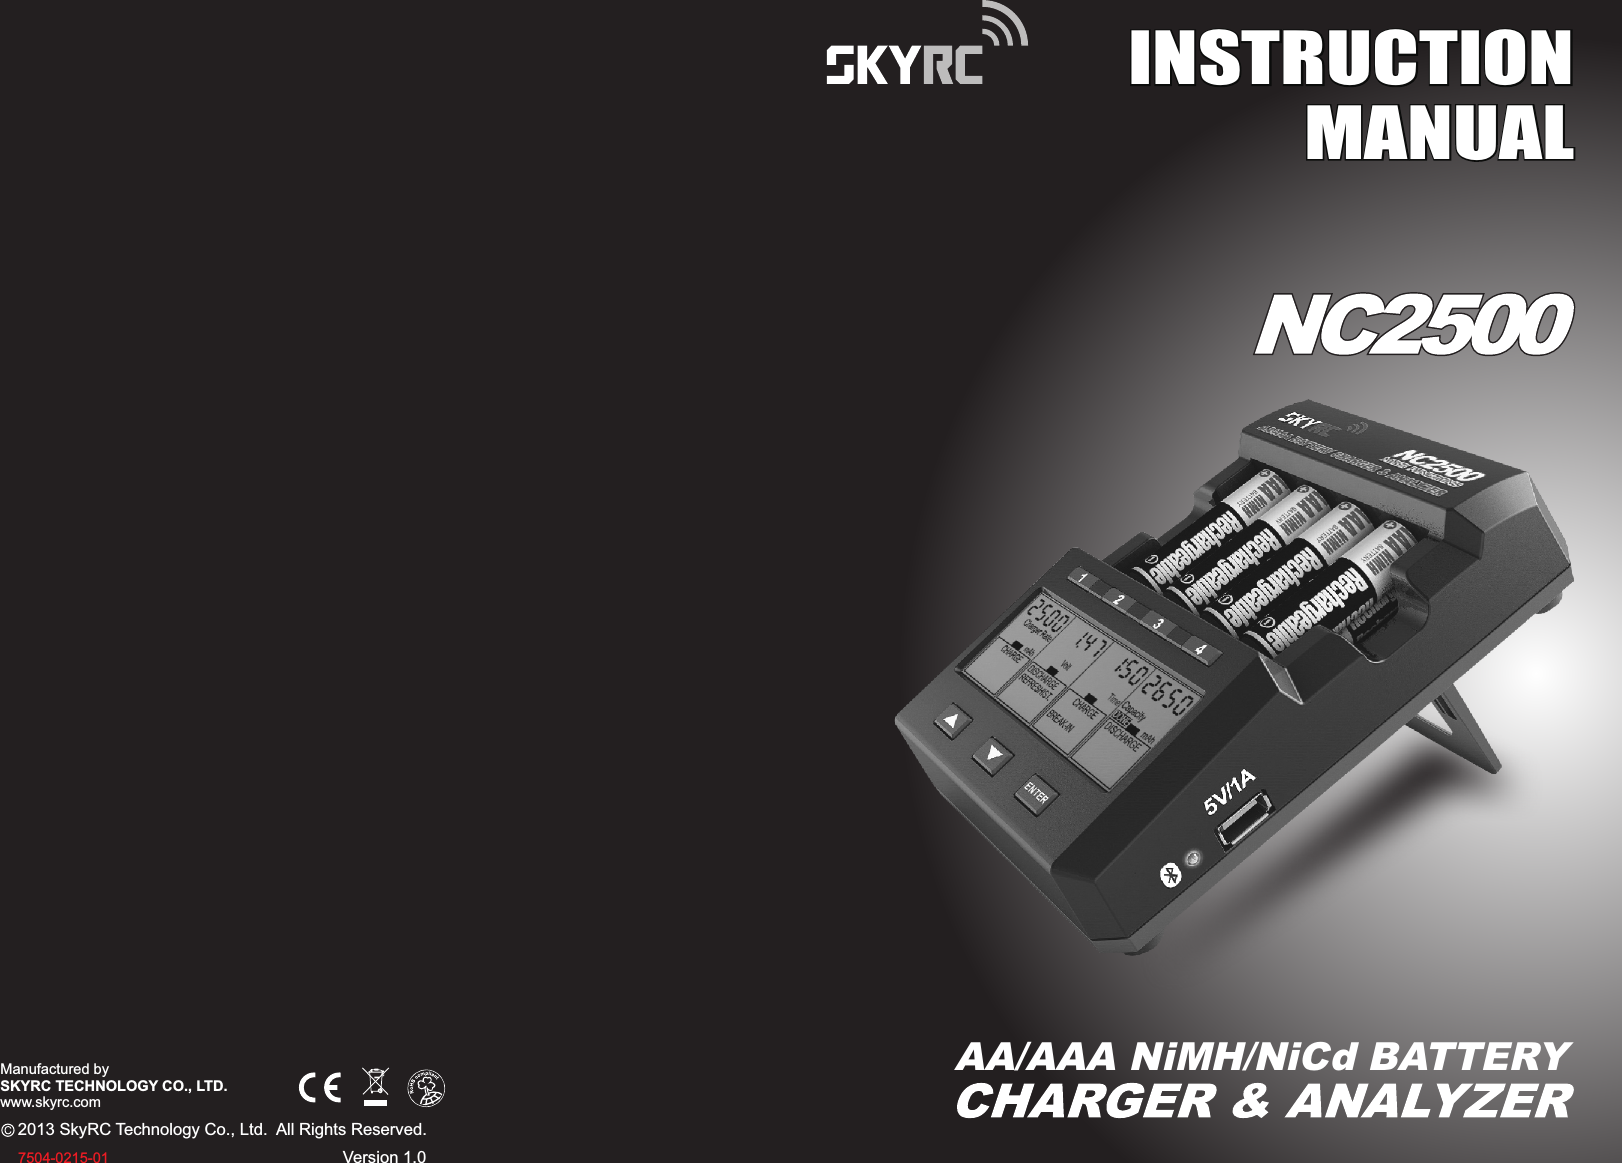     2013 SkyRC Technology Co., Ltd.  All Rights Reserved. Manufactured bySKYRC TECHNOLOGY CO., LTD.www.skyrc.com7504-0215-01INSTRUCTIONMANUALINSTRUCTIONMANUALAA/AAA NiMH/NiCd BATTERY Version 1.0